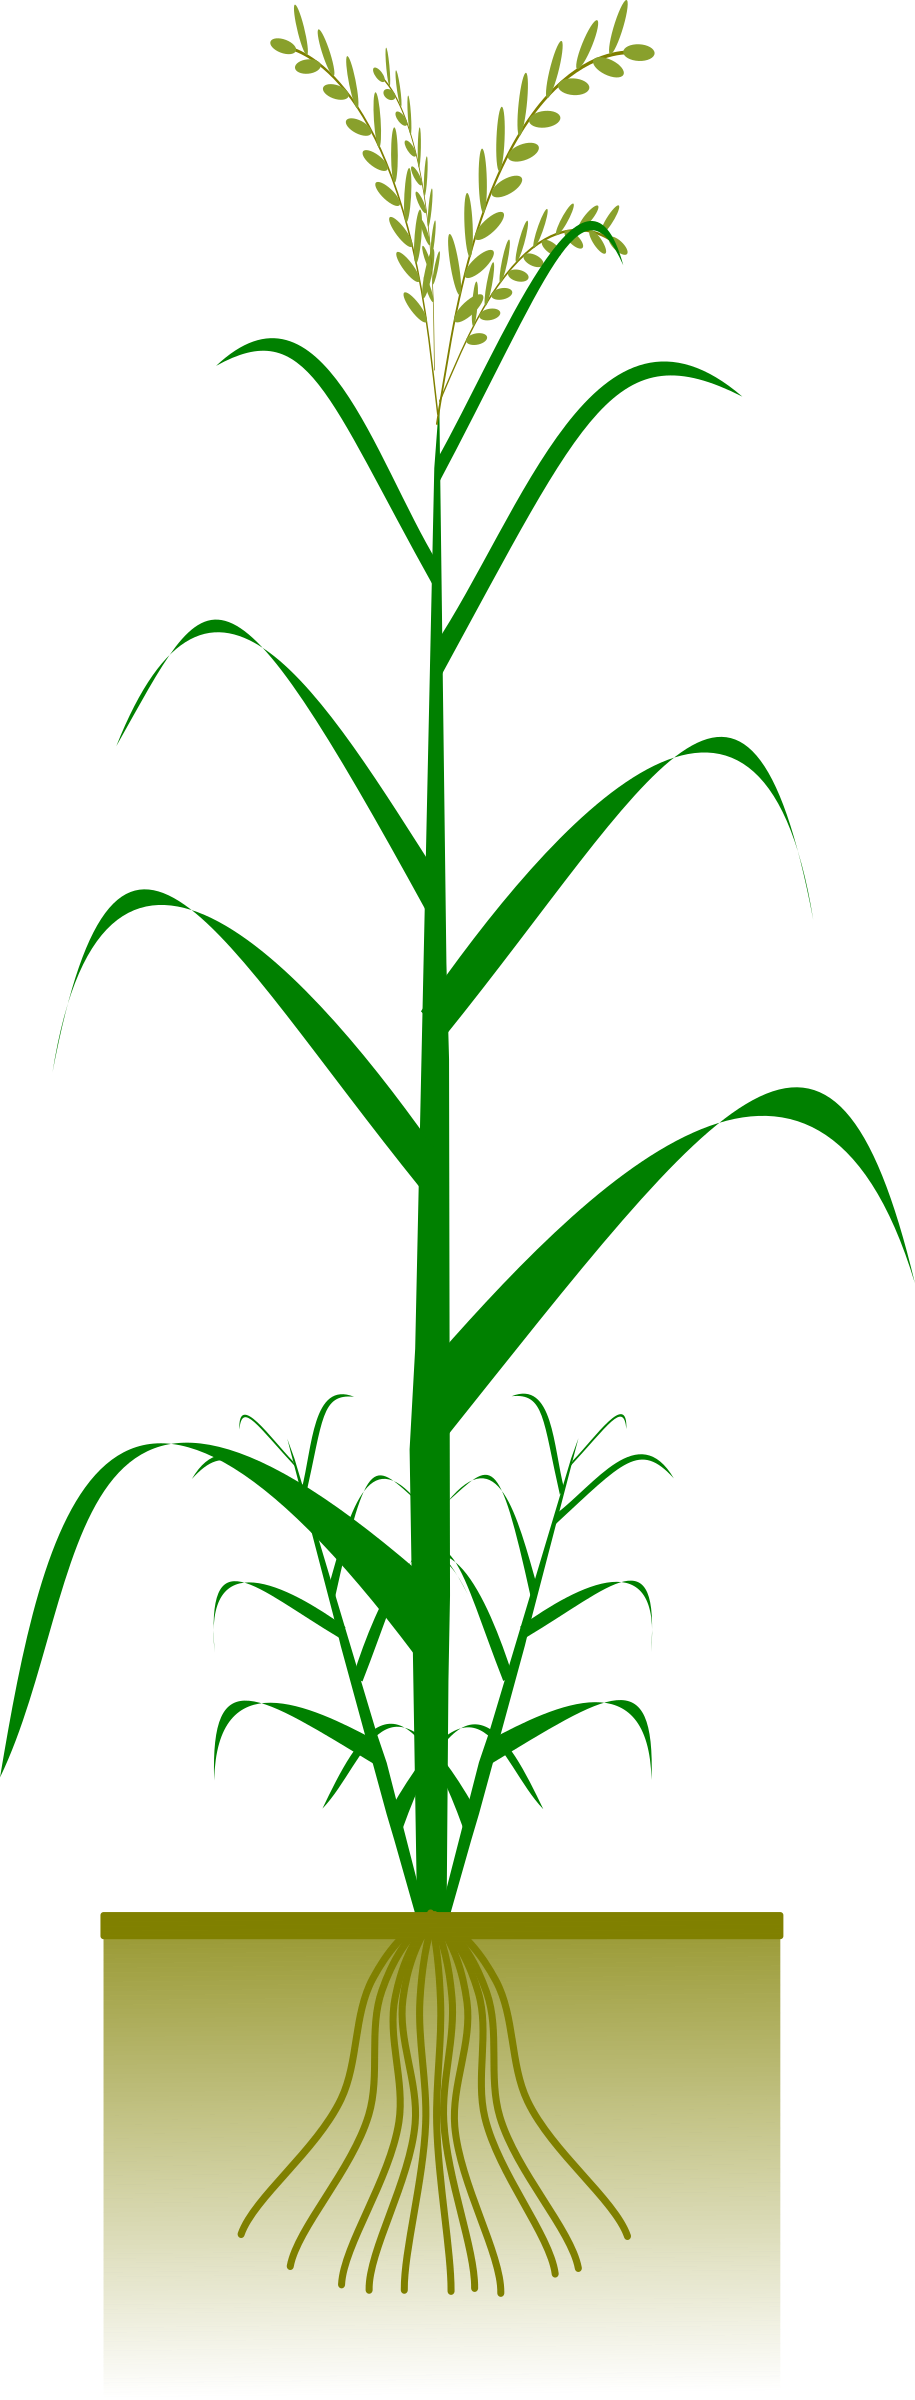 Crops clipart palay. Animated rice plant crazywidow